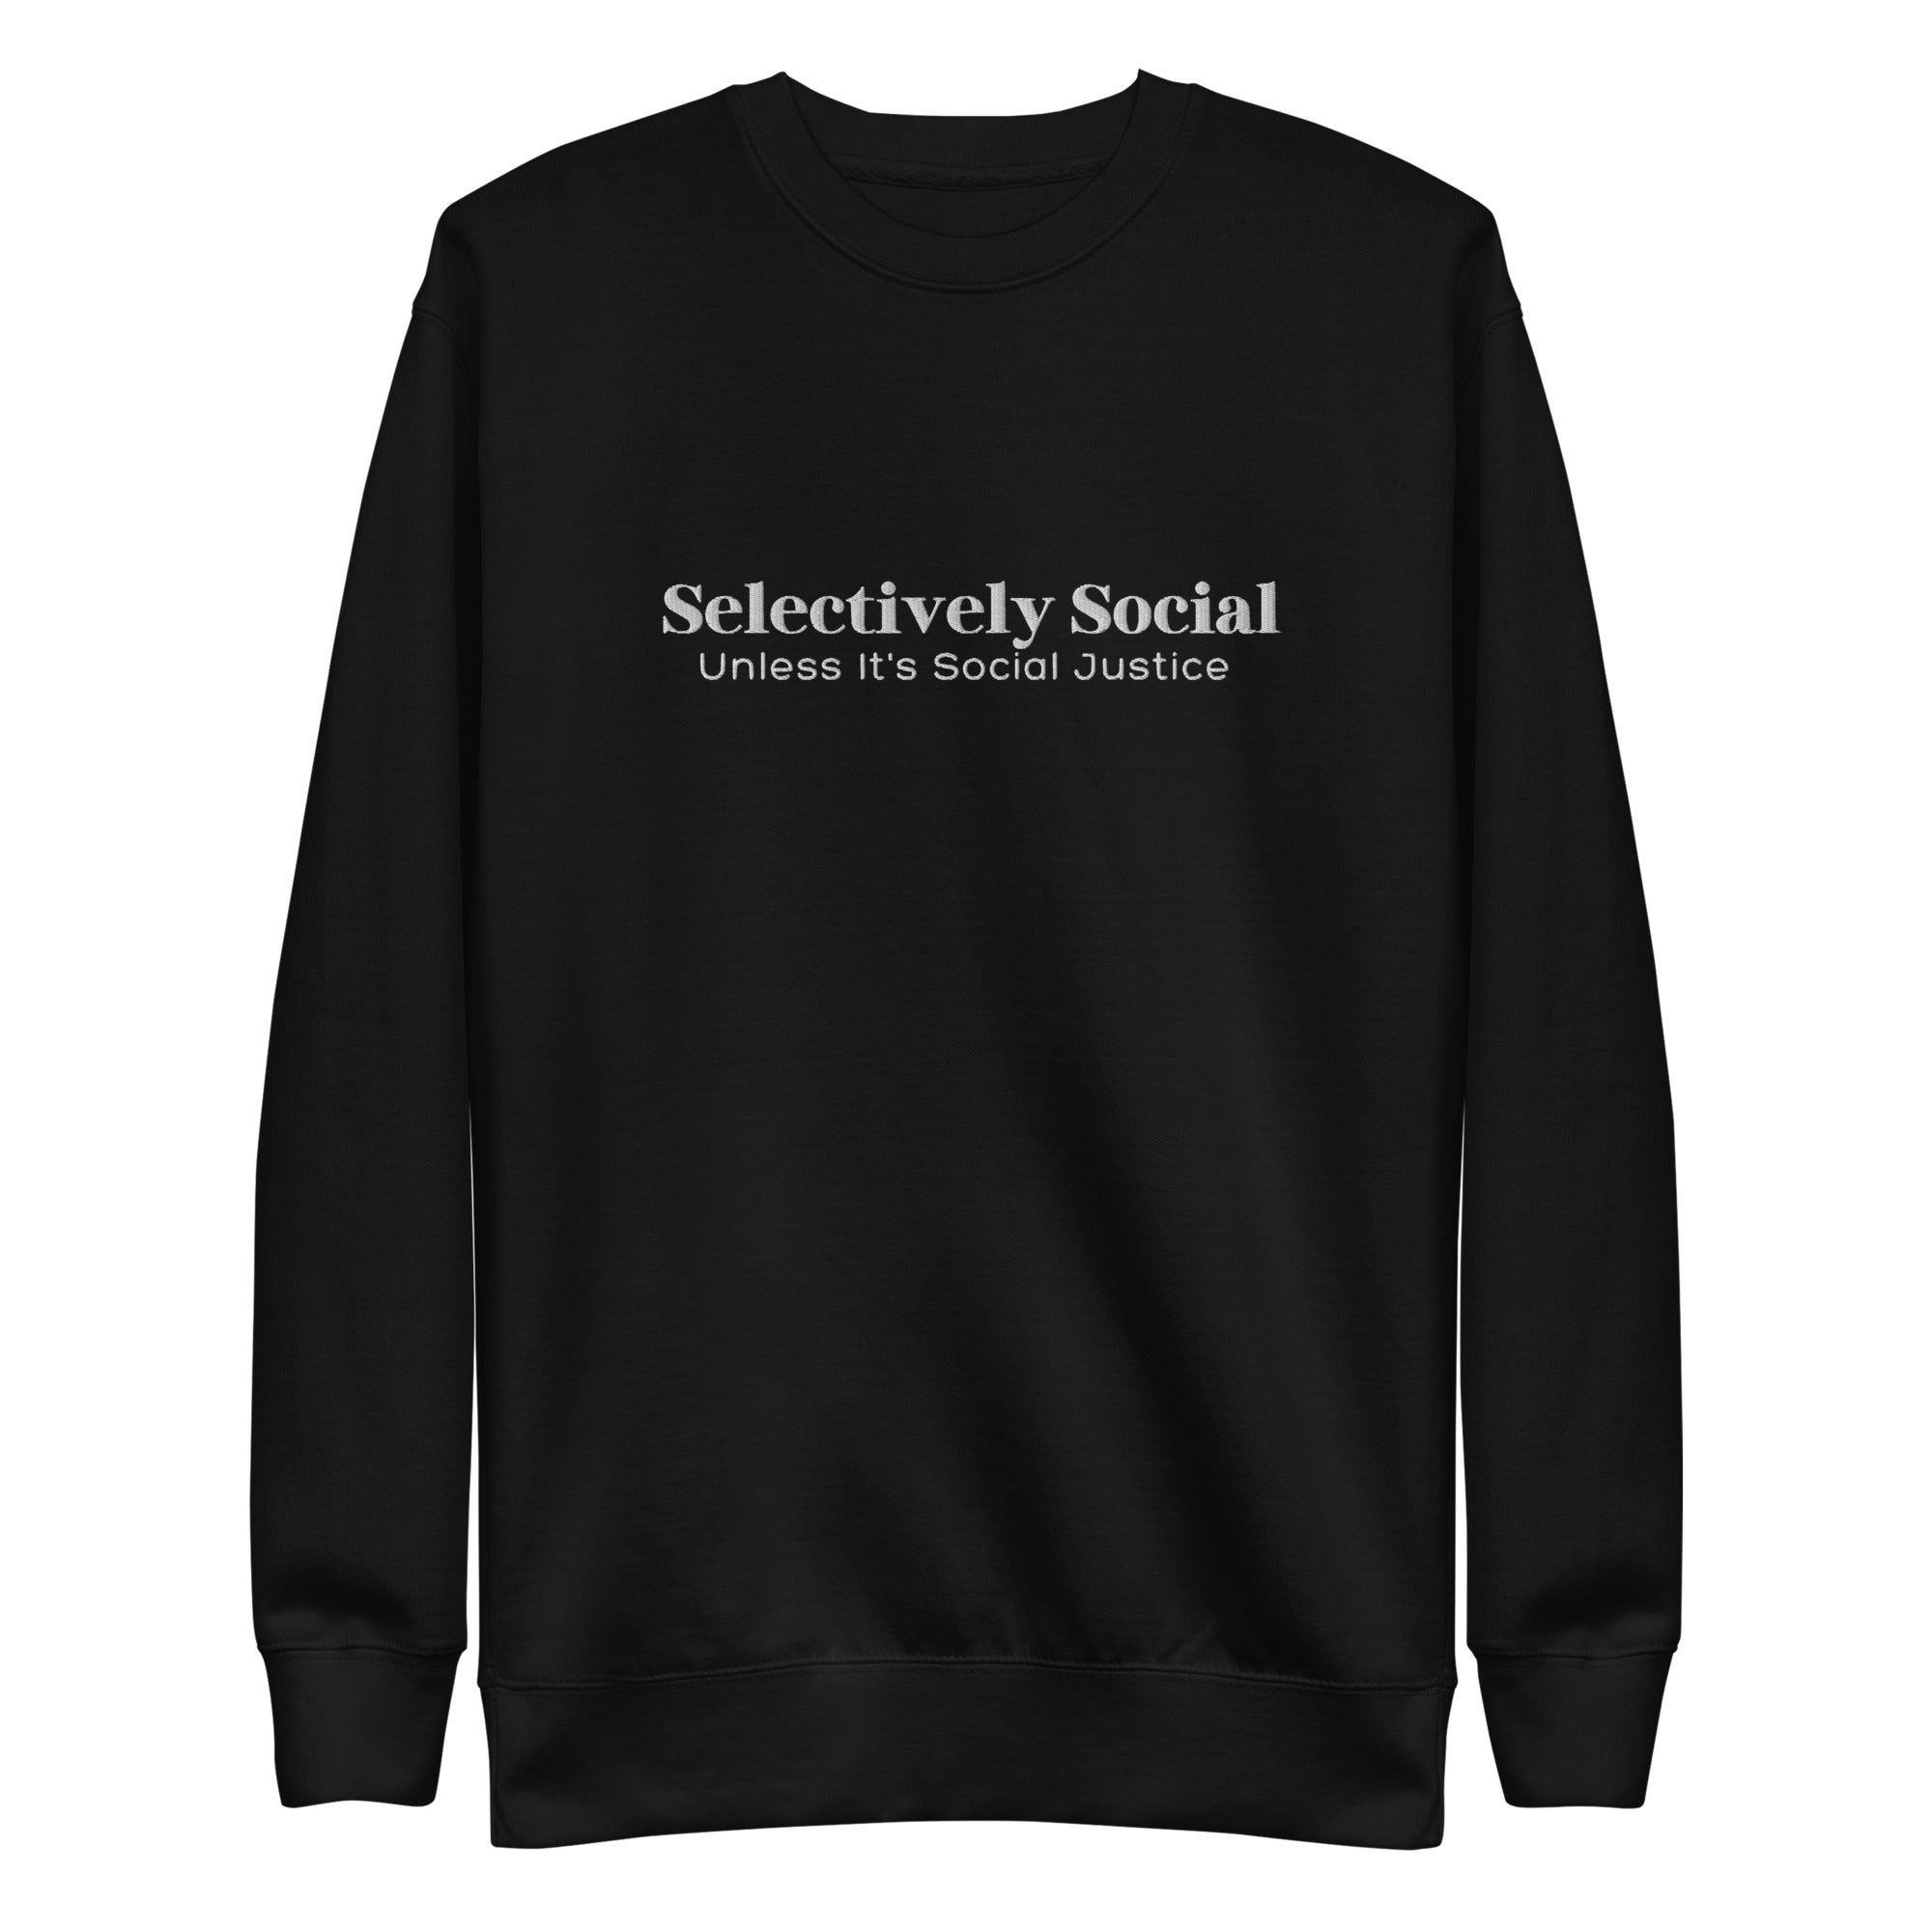 Selectively Social White Embroidery Unisex Premium Sweatshirt - The Kindness Cause